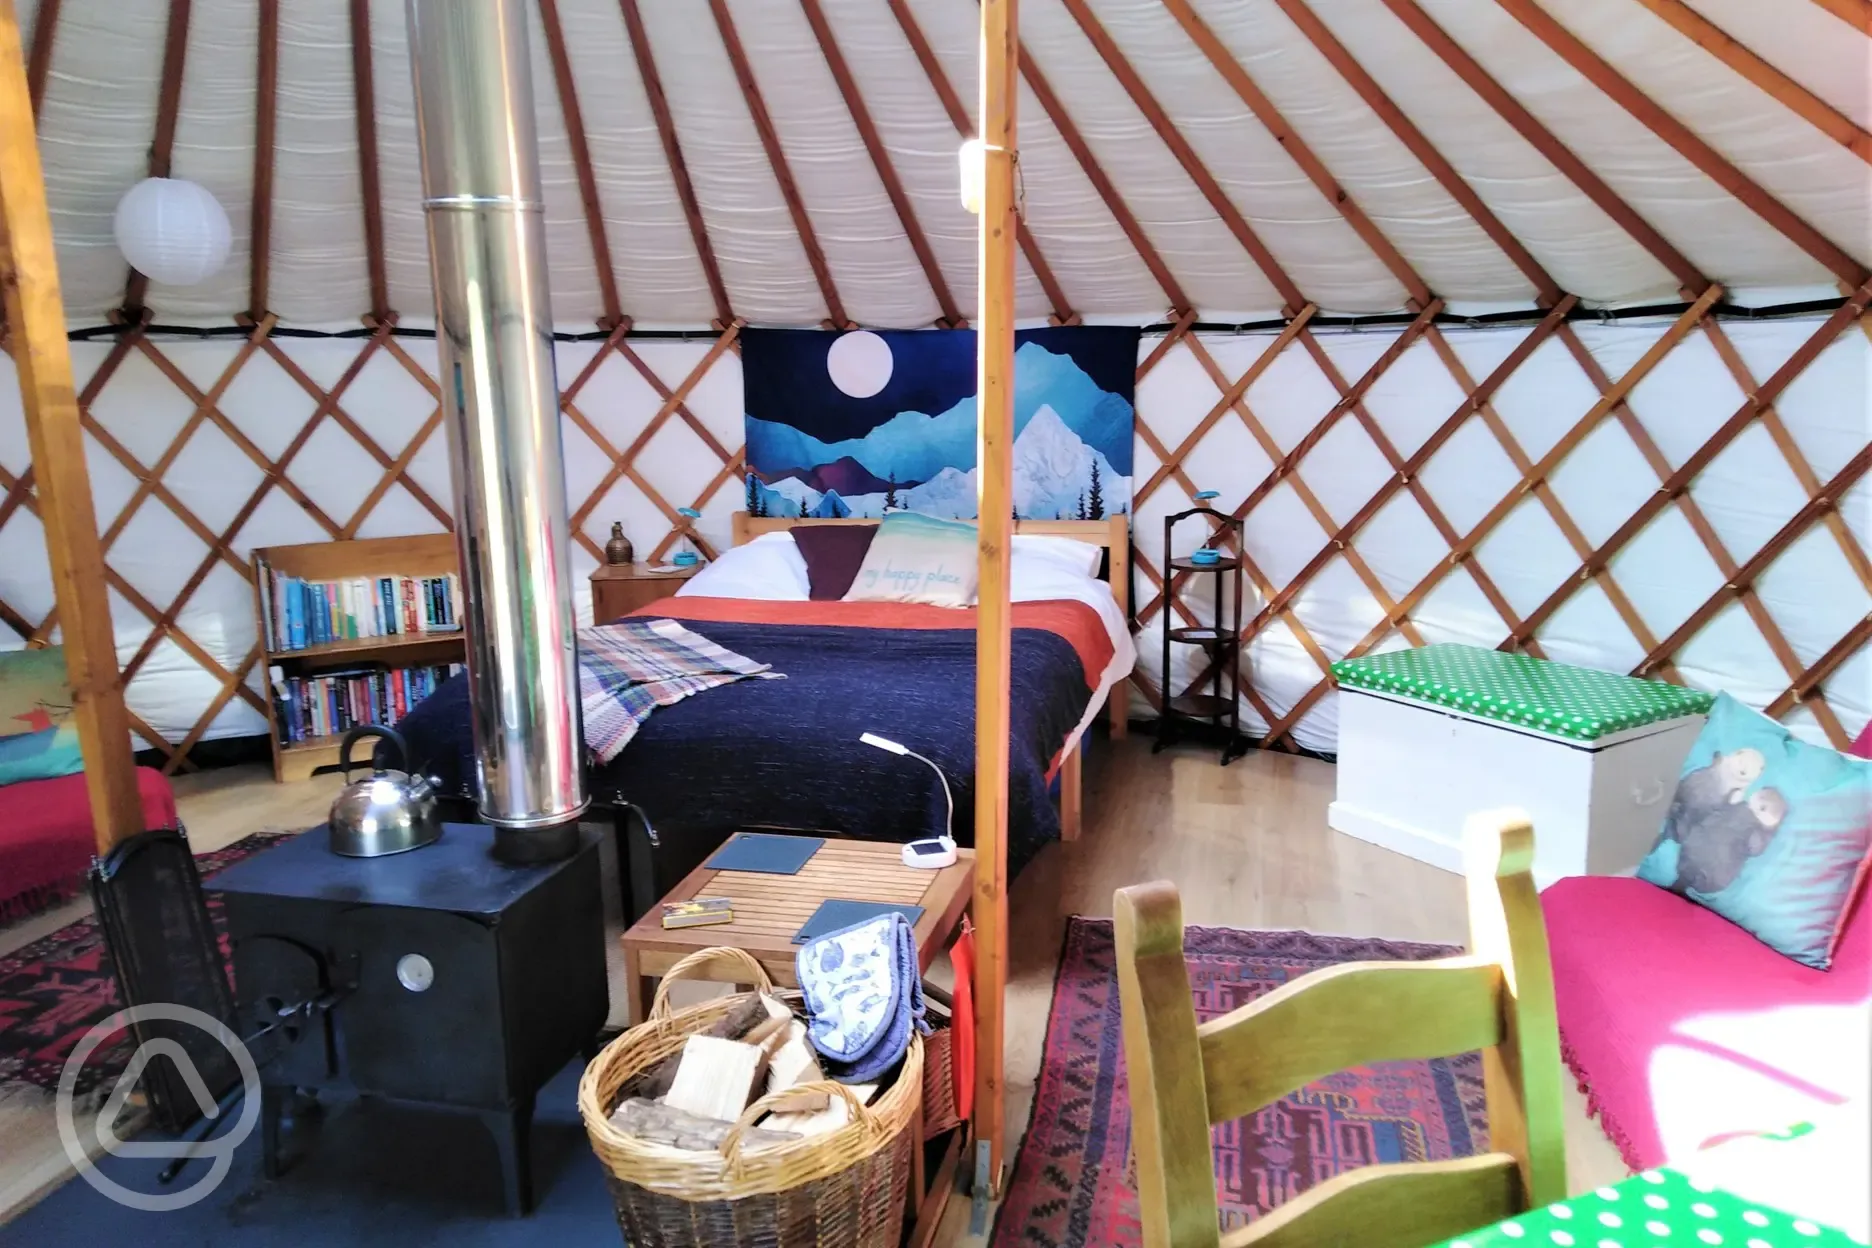 Inside one of our yurts